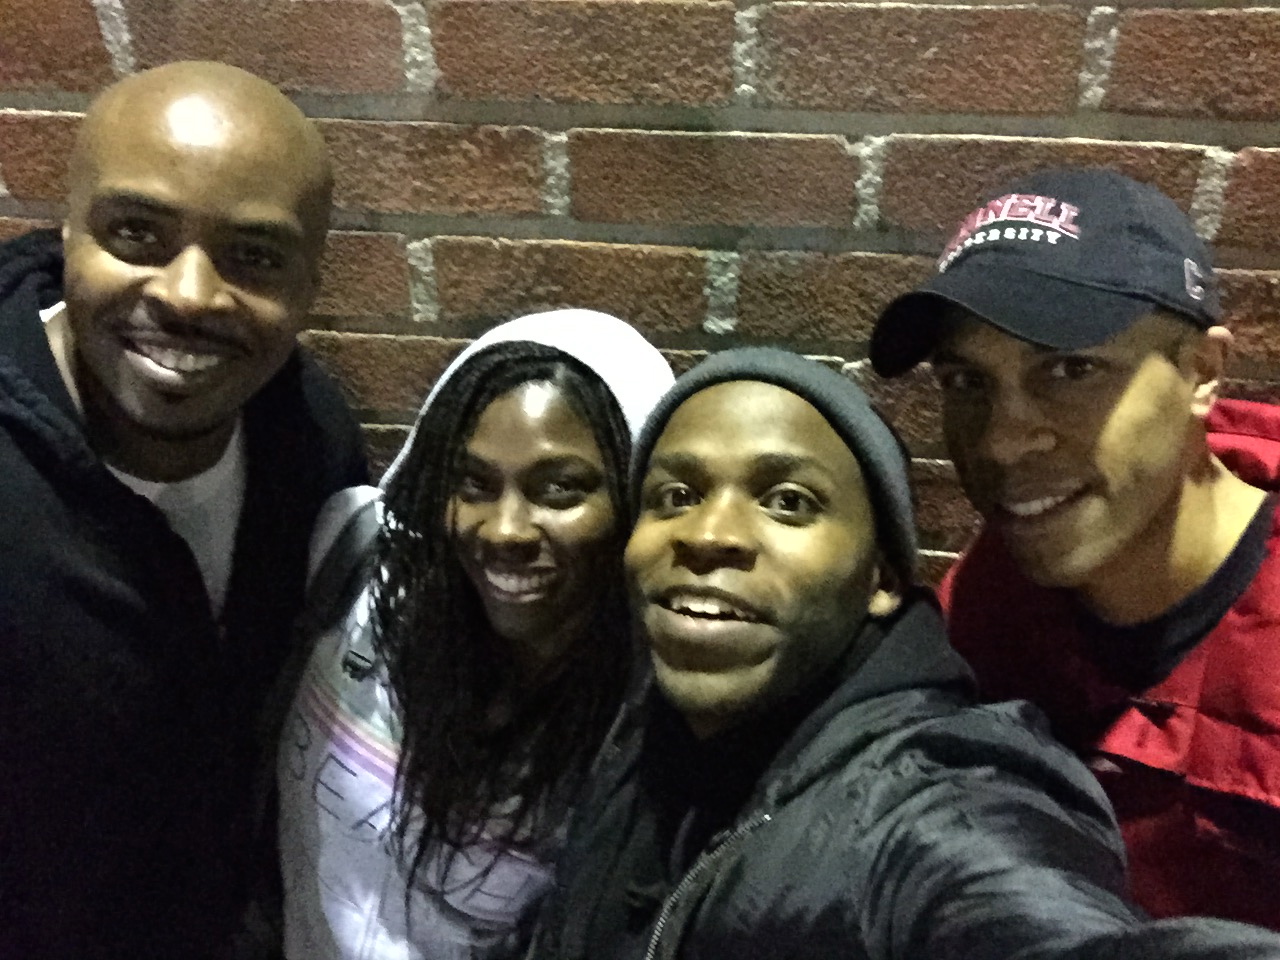 'Girl With A Backpack' on location - Vishani with cast mates Kenneth Mosley and Sharieff Walters, and director Mark Allen.